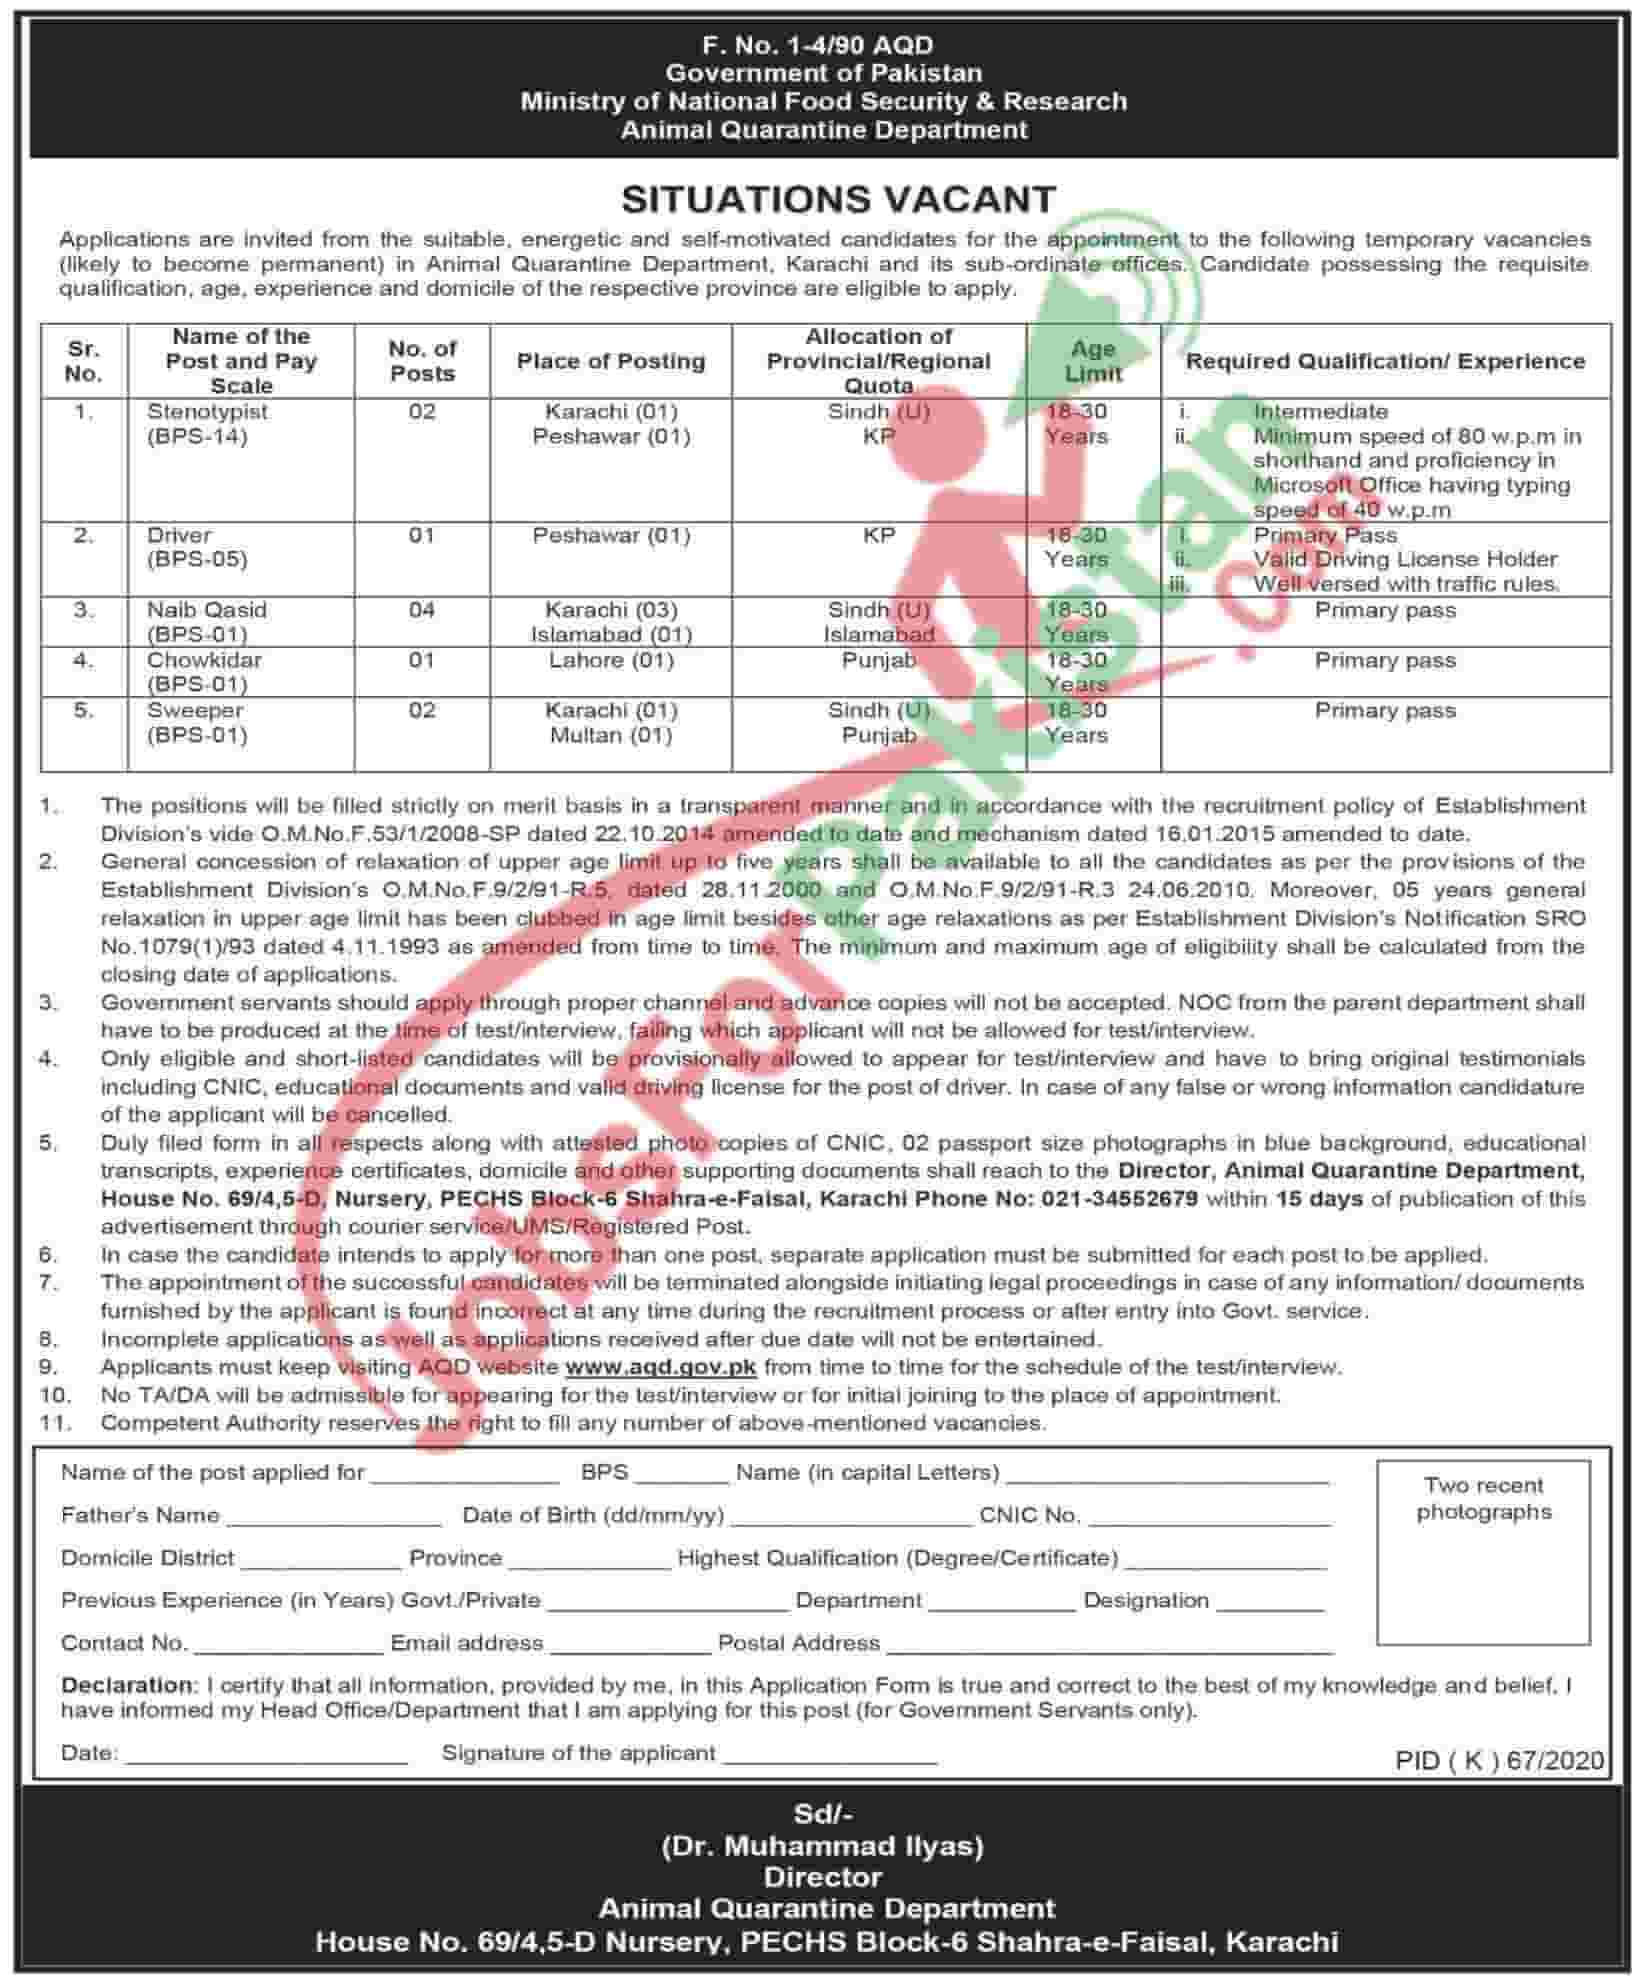 Ministry of National Food Security & Research Jobs 2020 new vacancies in Pakistan 